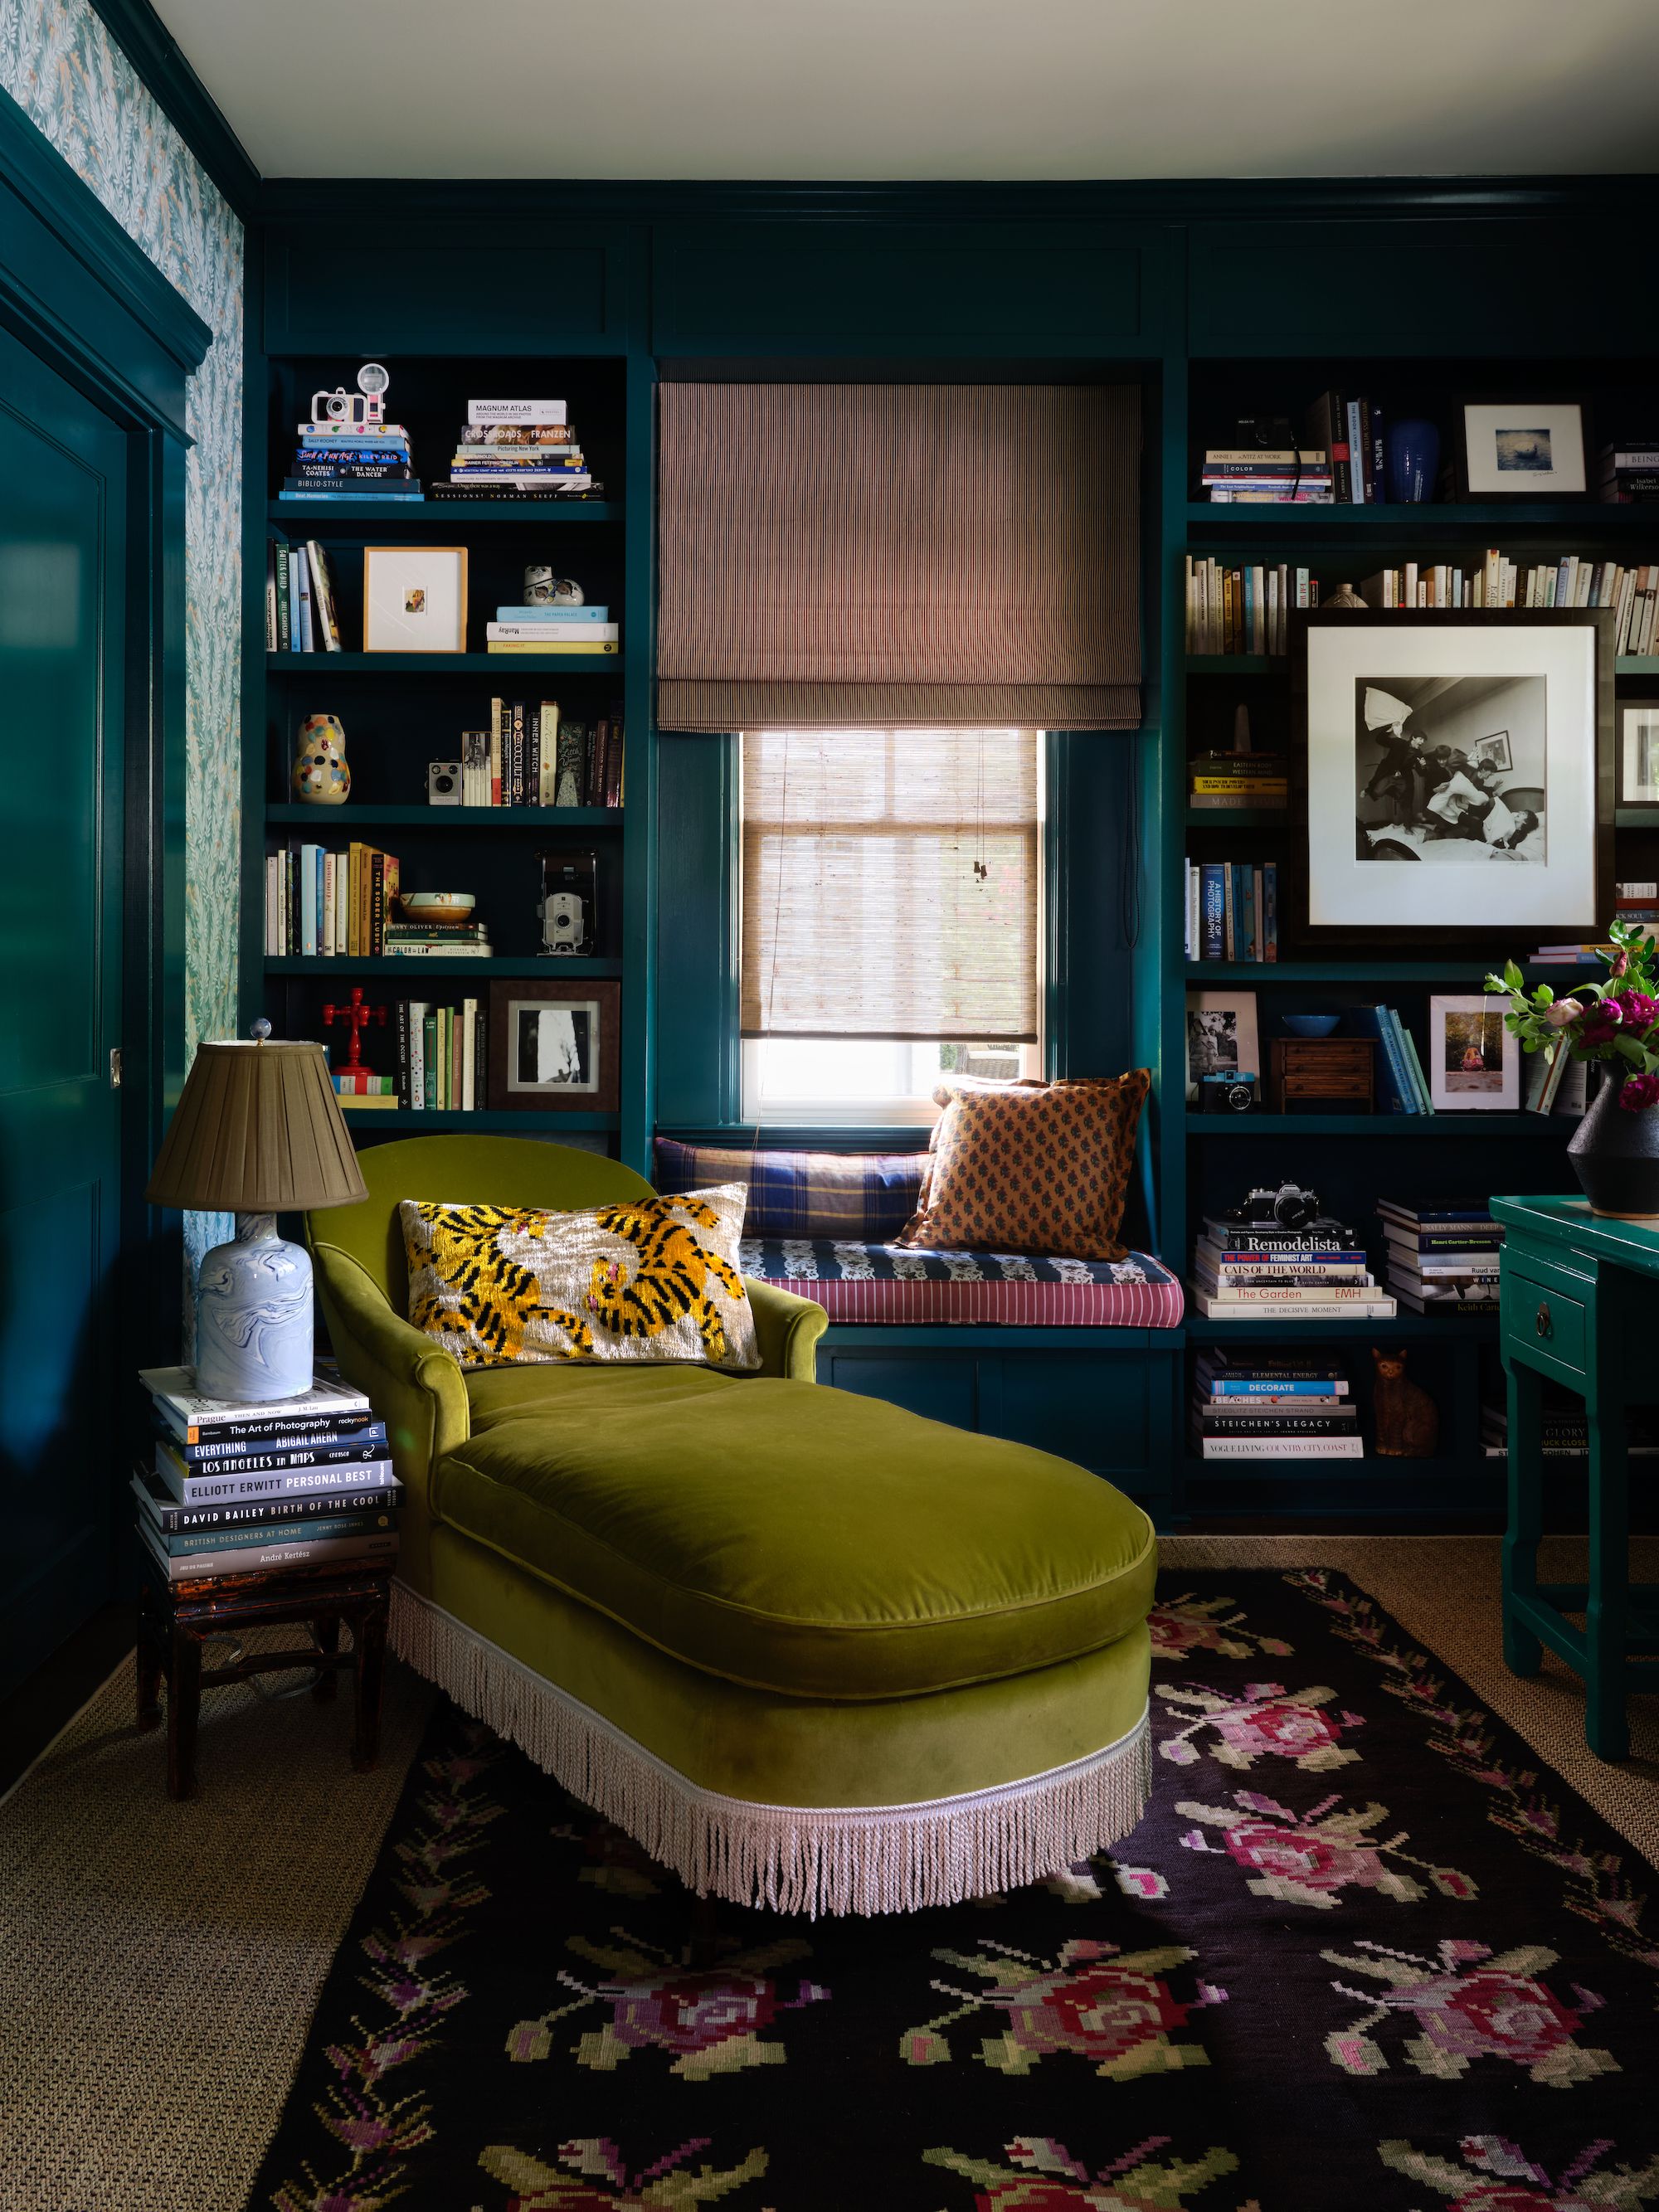 My Green Living Room with Dark Green Paint - Bigger Than the Three of Us